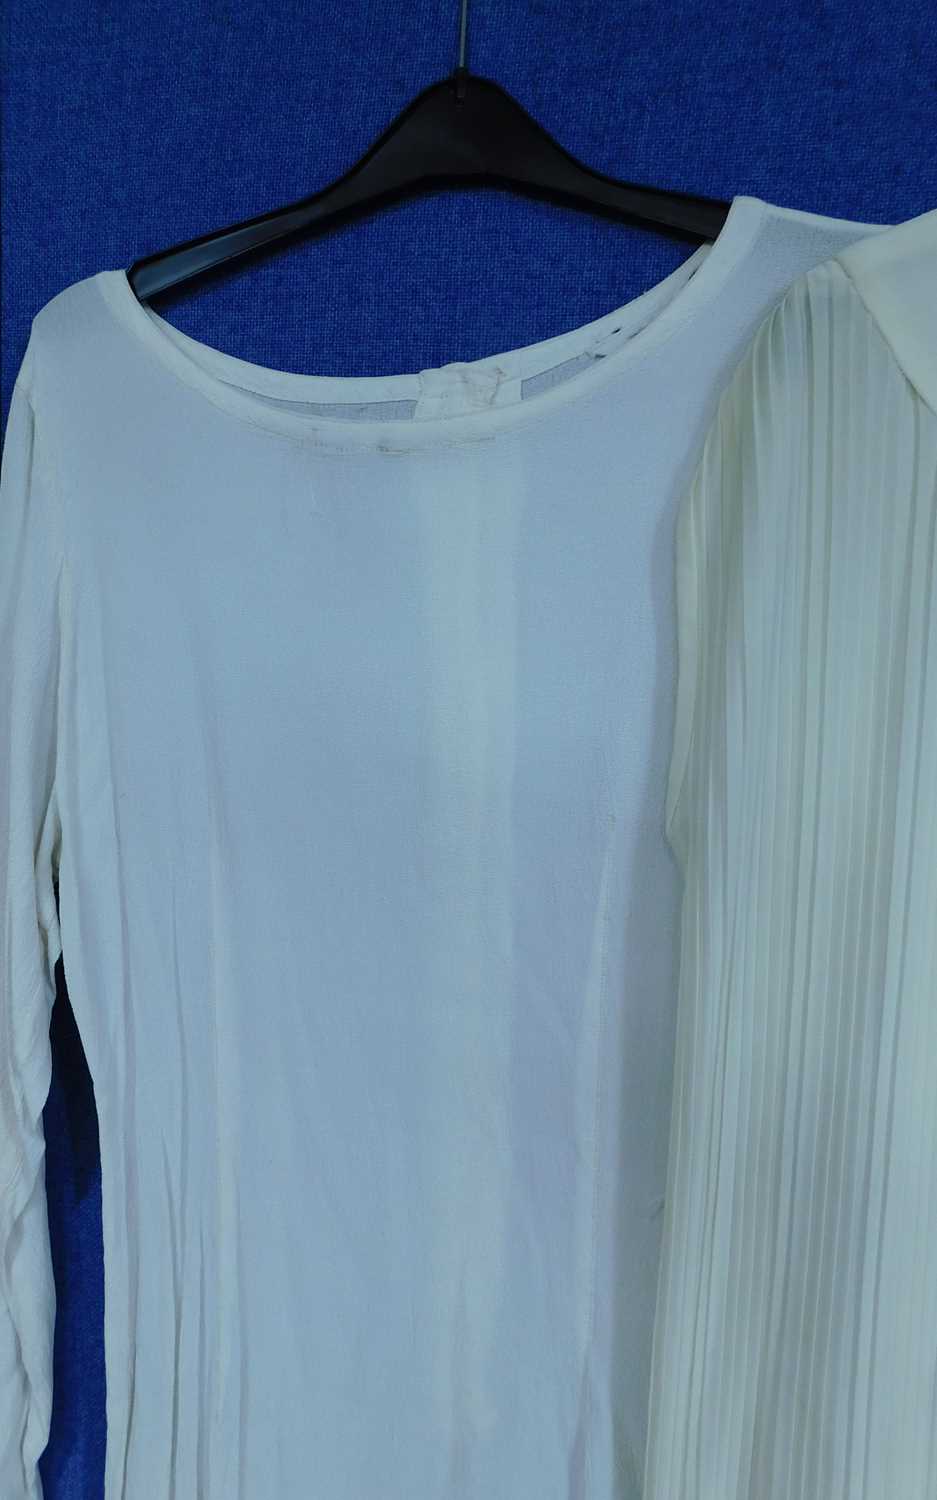 Three cream lady's occasion wear dresses to include a sleeveless shift by Monsoon Twilight with - Image 6 of 8